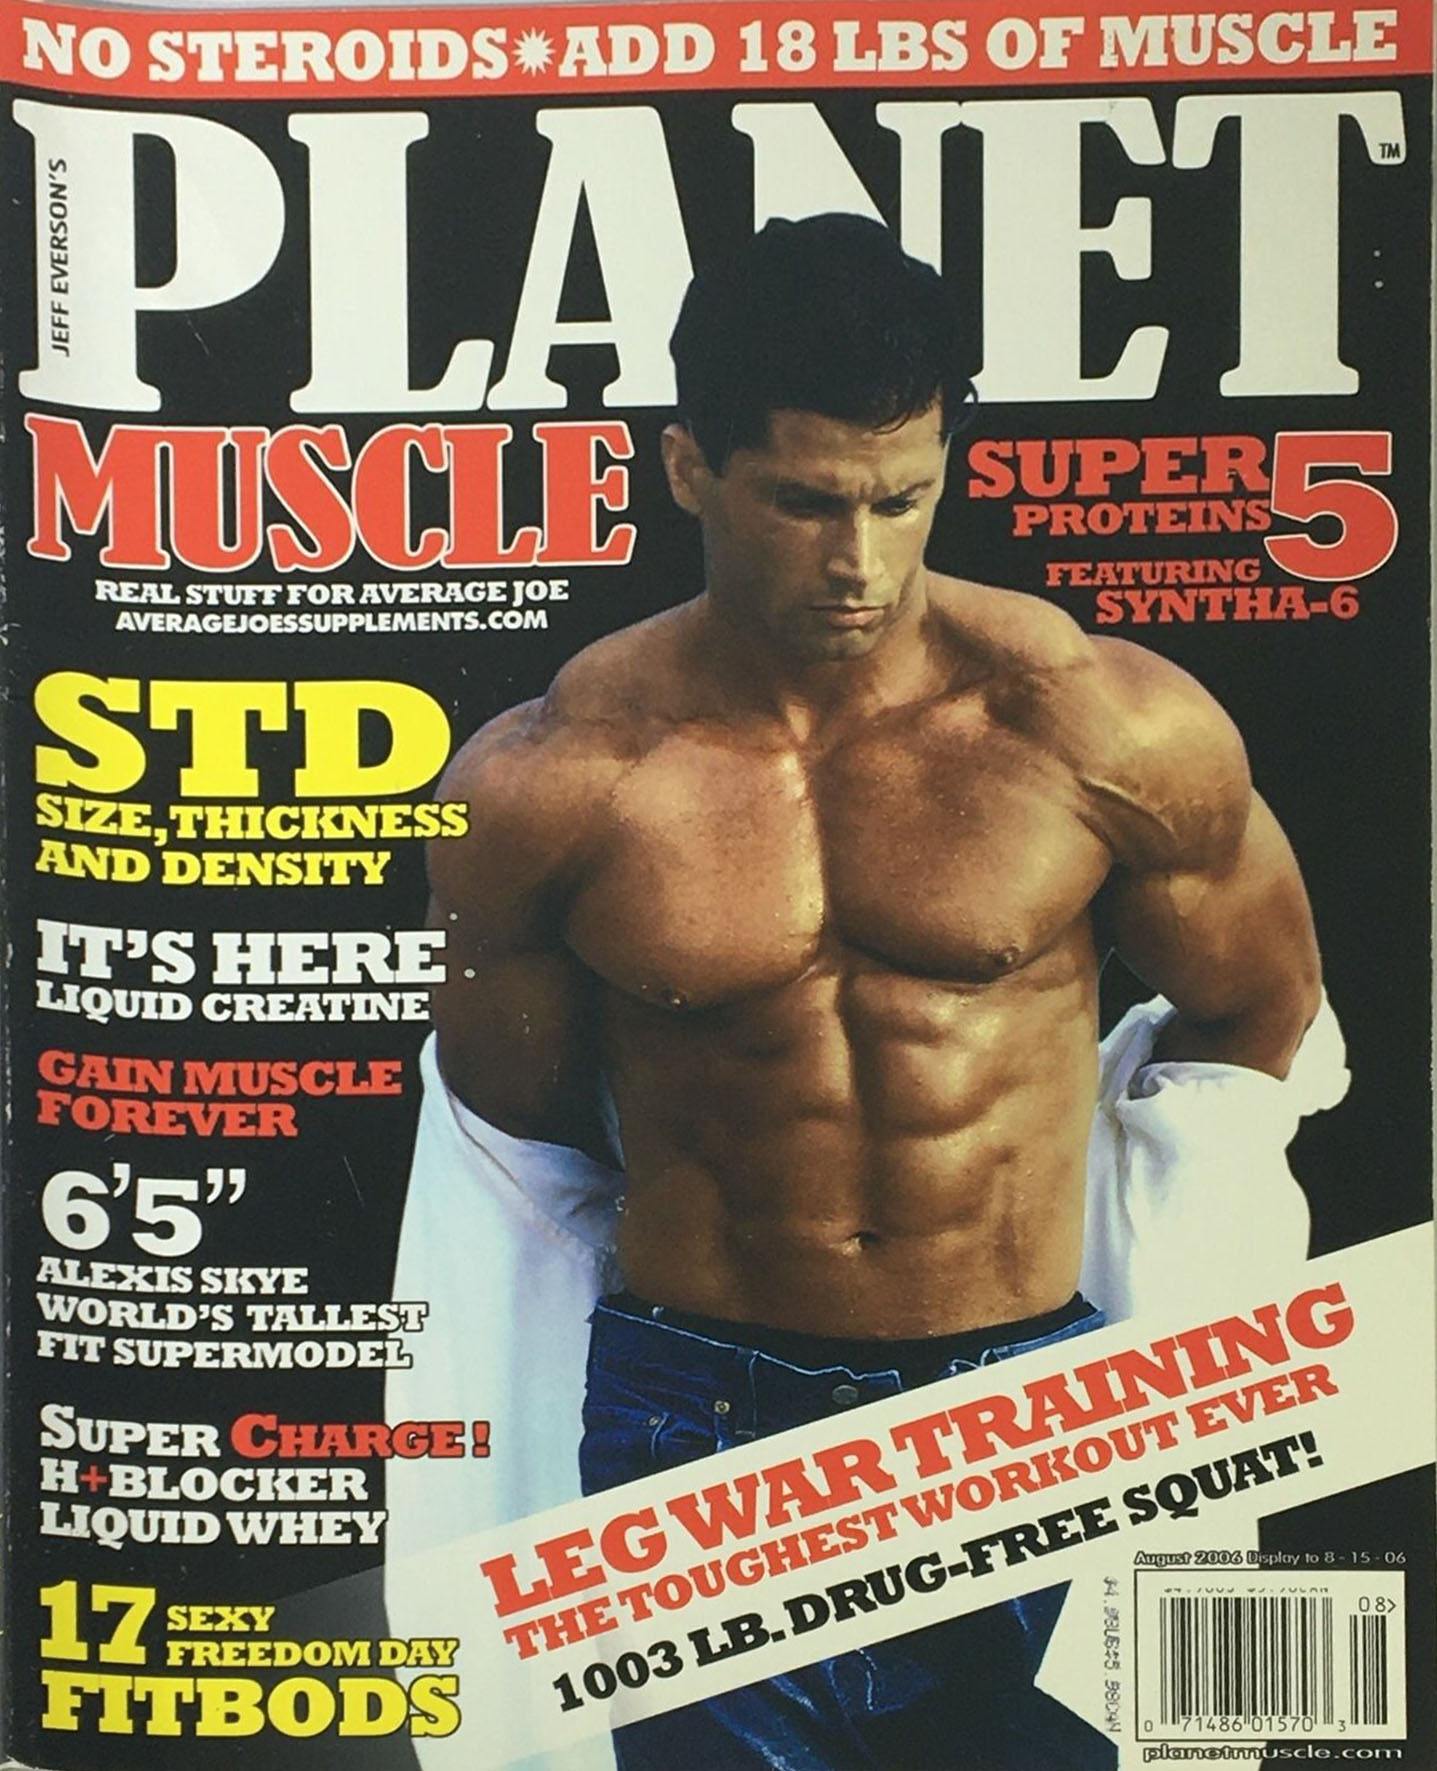 Planet Muscle August 2006, , STD Size, Thickness And Density